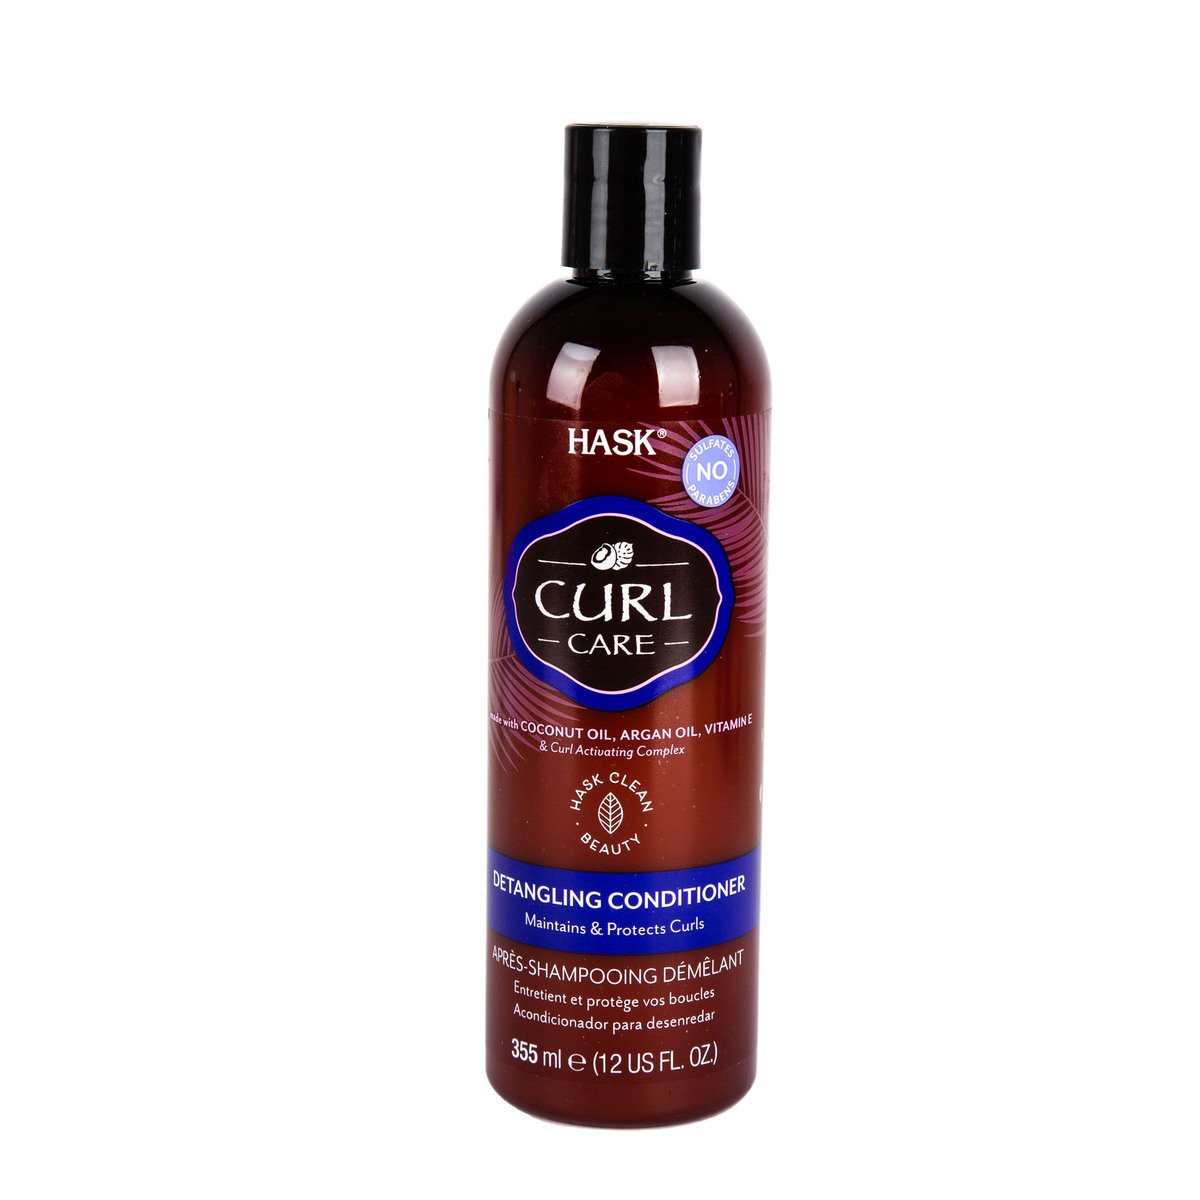 Hask Curl Care Detangling Conditioner, 355 ml